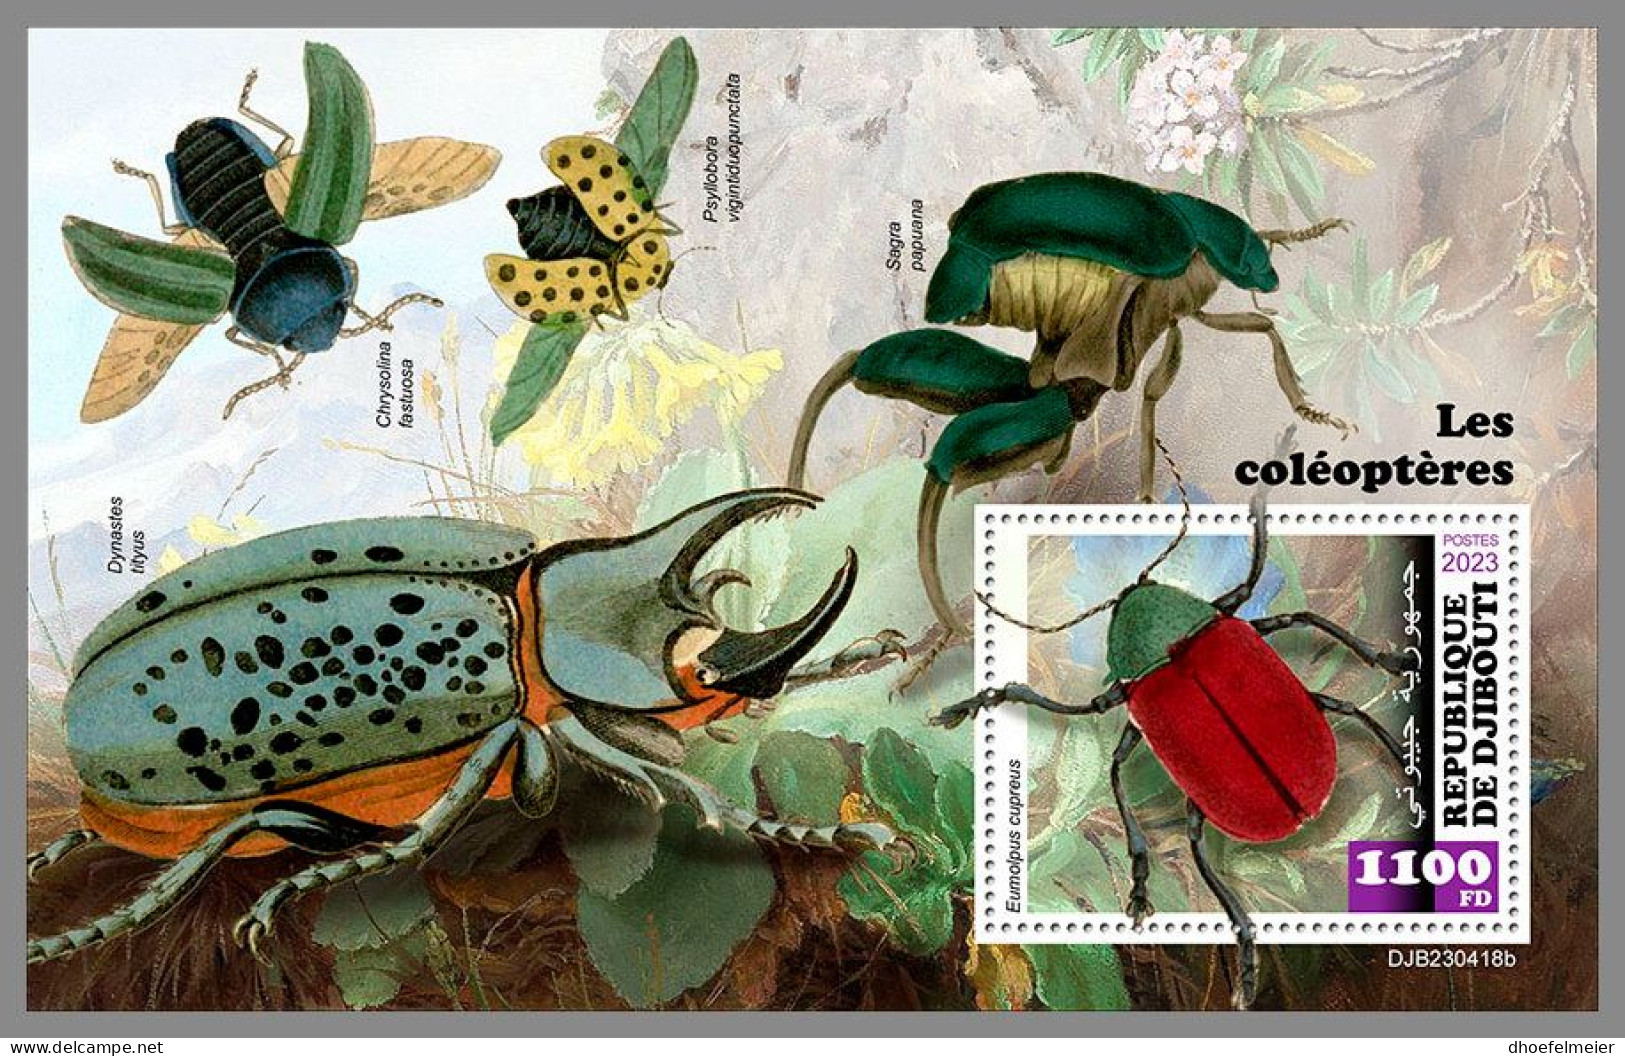 DJIBOUTI 2023 MNH Beetles Käfer S/S – OFFICIAL ISSUE – DHQ2420 - Escarabajos